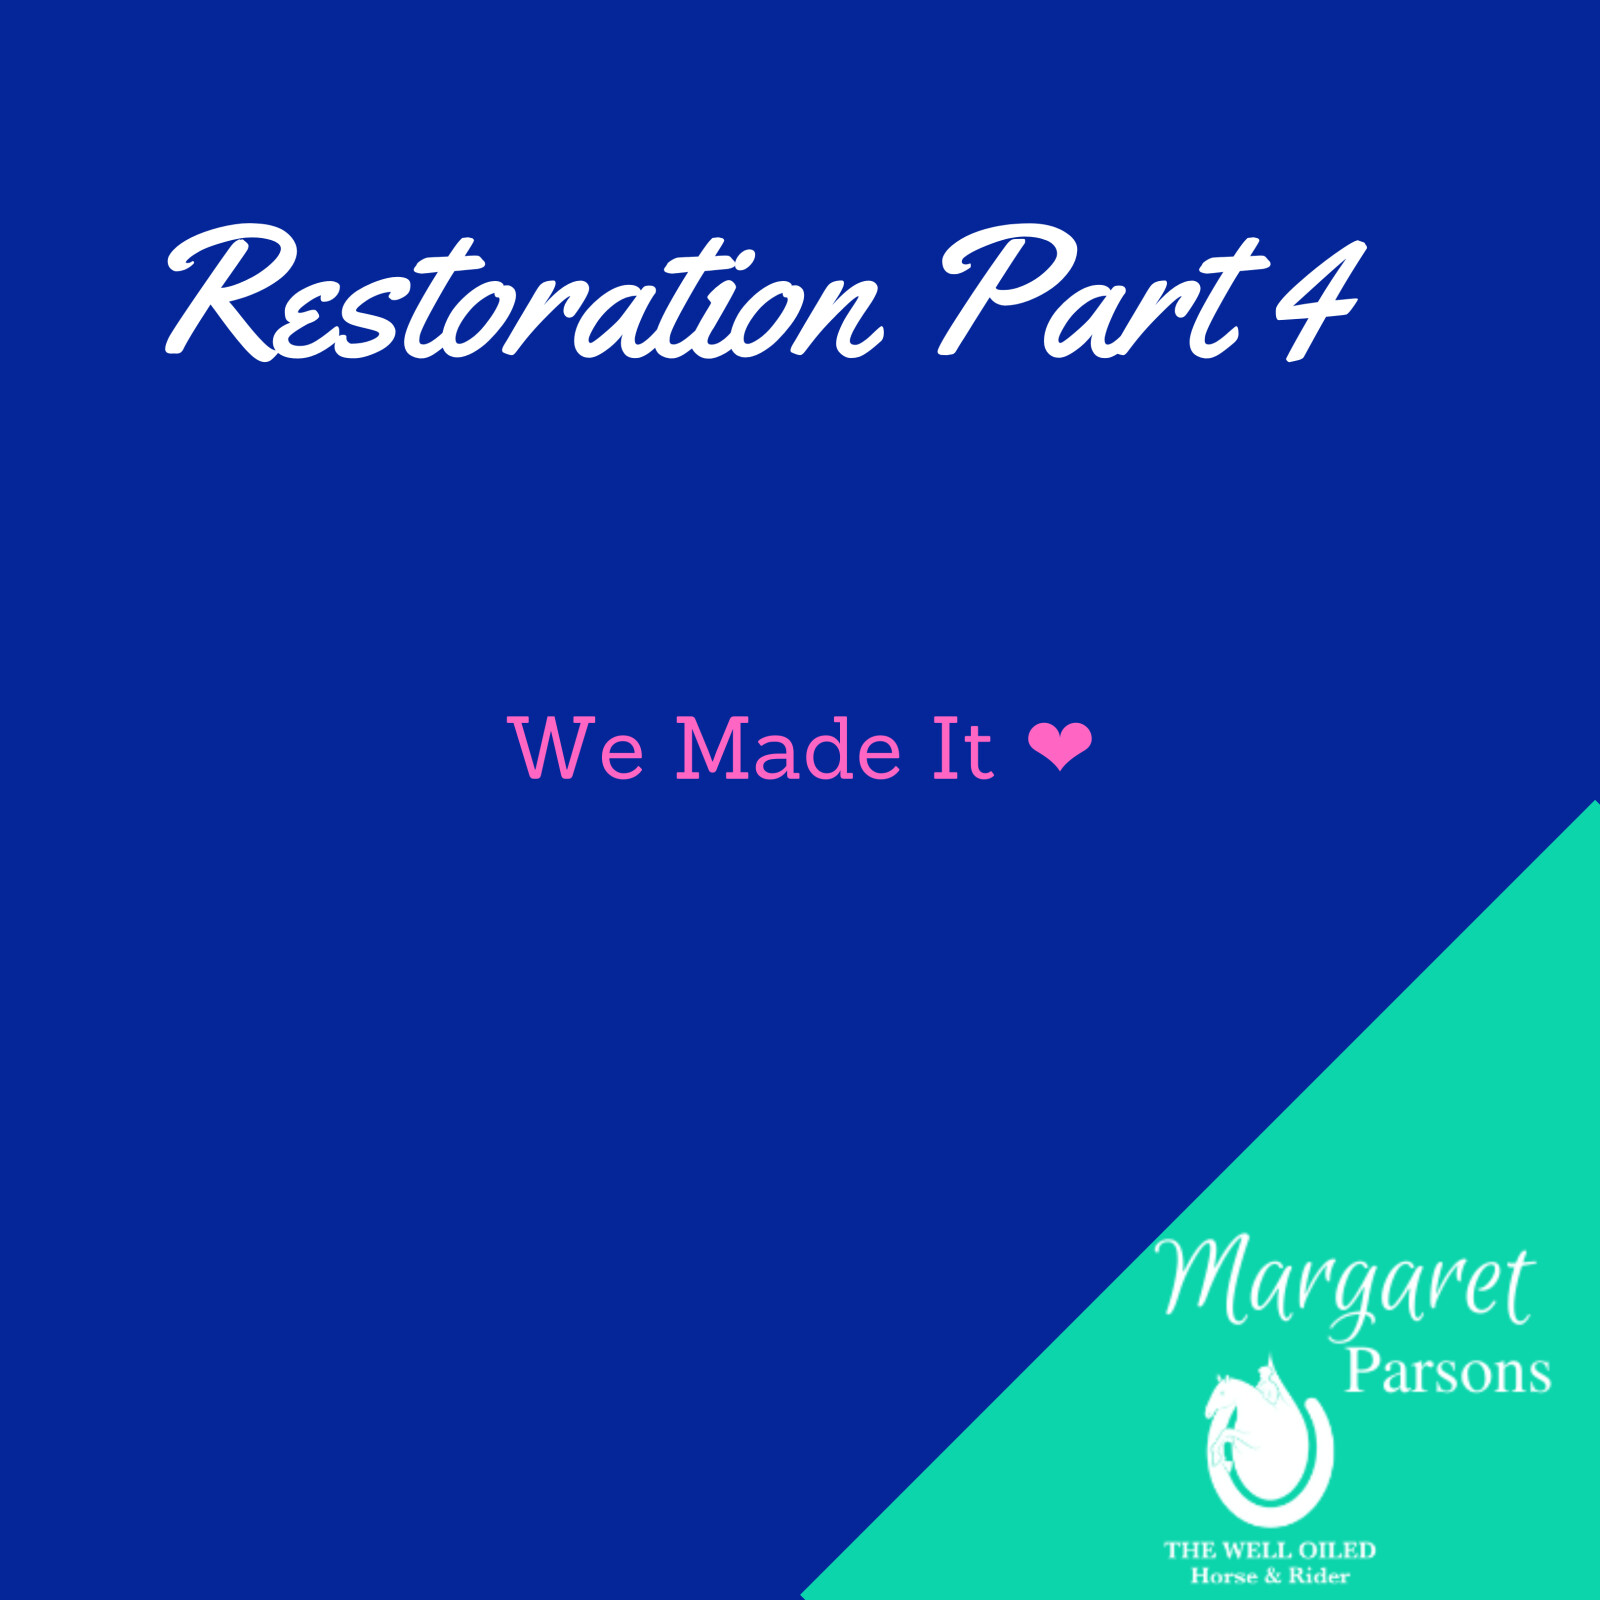 Restoration Part 4: Twice as Much as Before